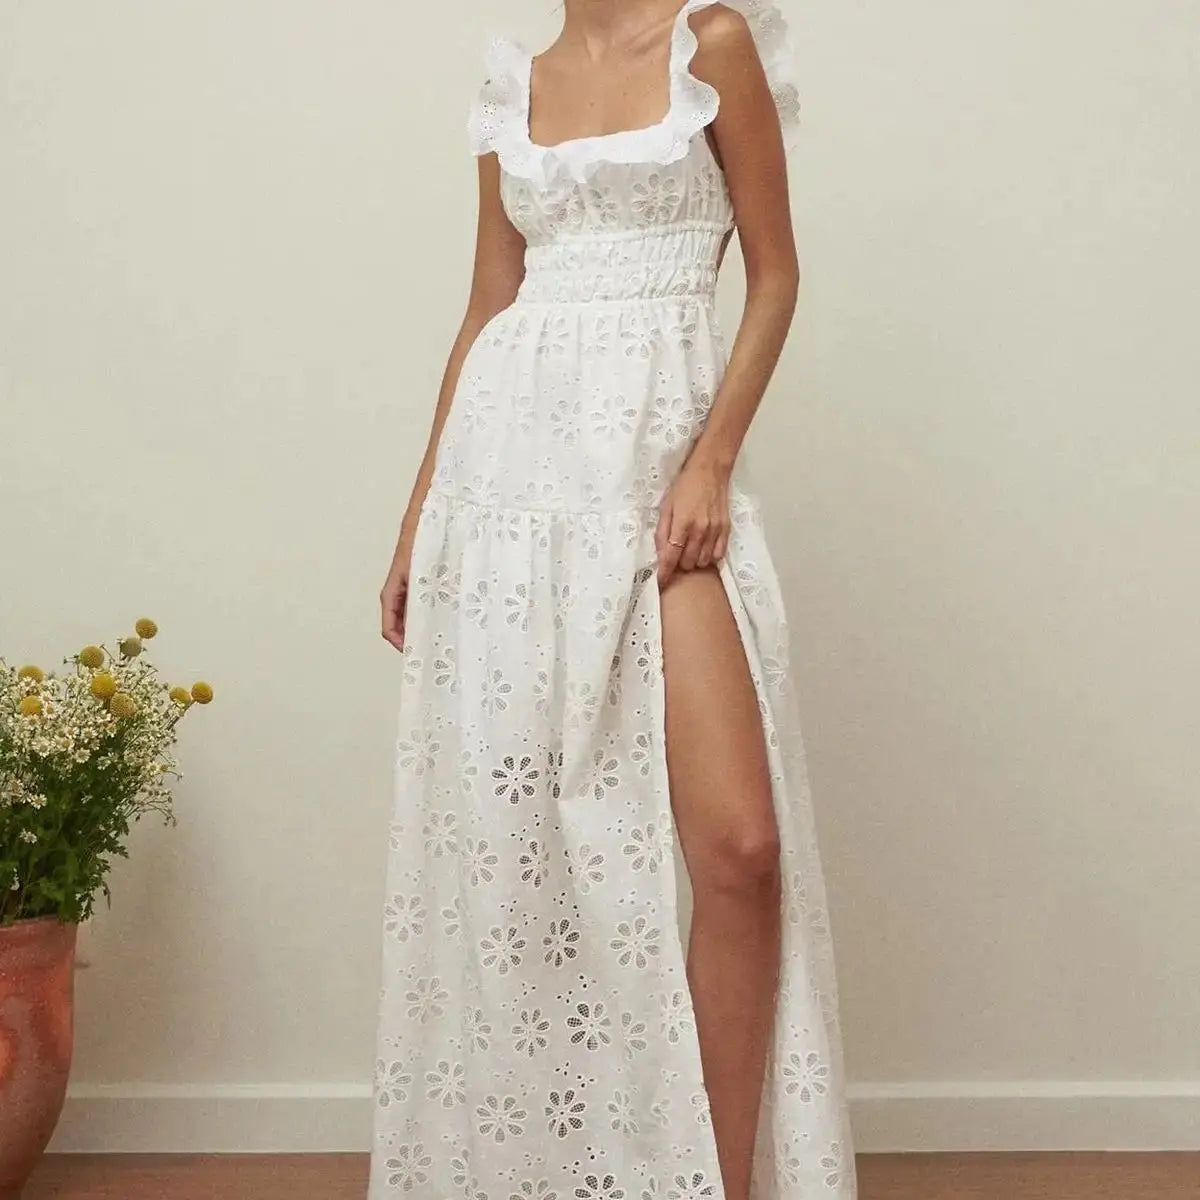 Vacation Dresses- Summer Romance Women's Fit & Flare Embroidered Midi Dress for Garden Parties- Slit Dress- Chuzko Women Clothing